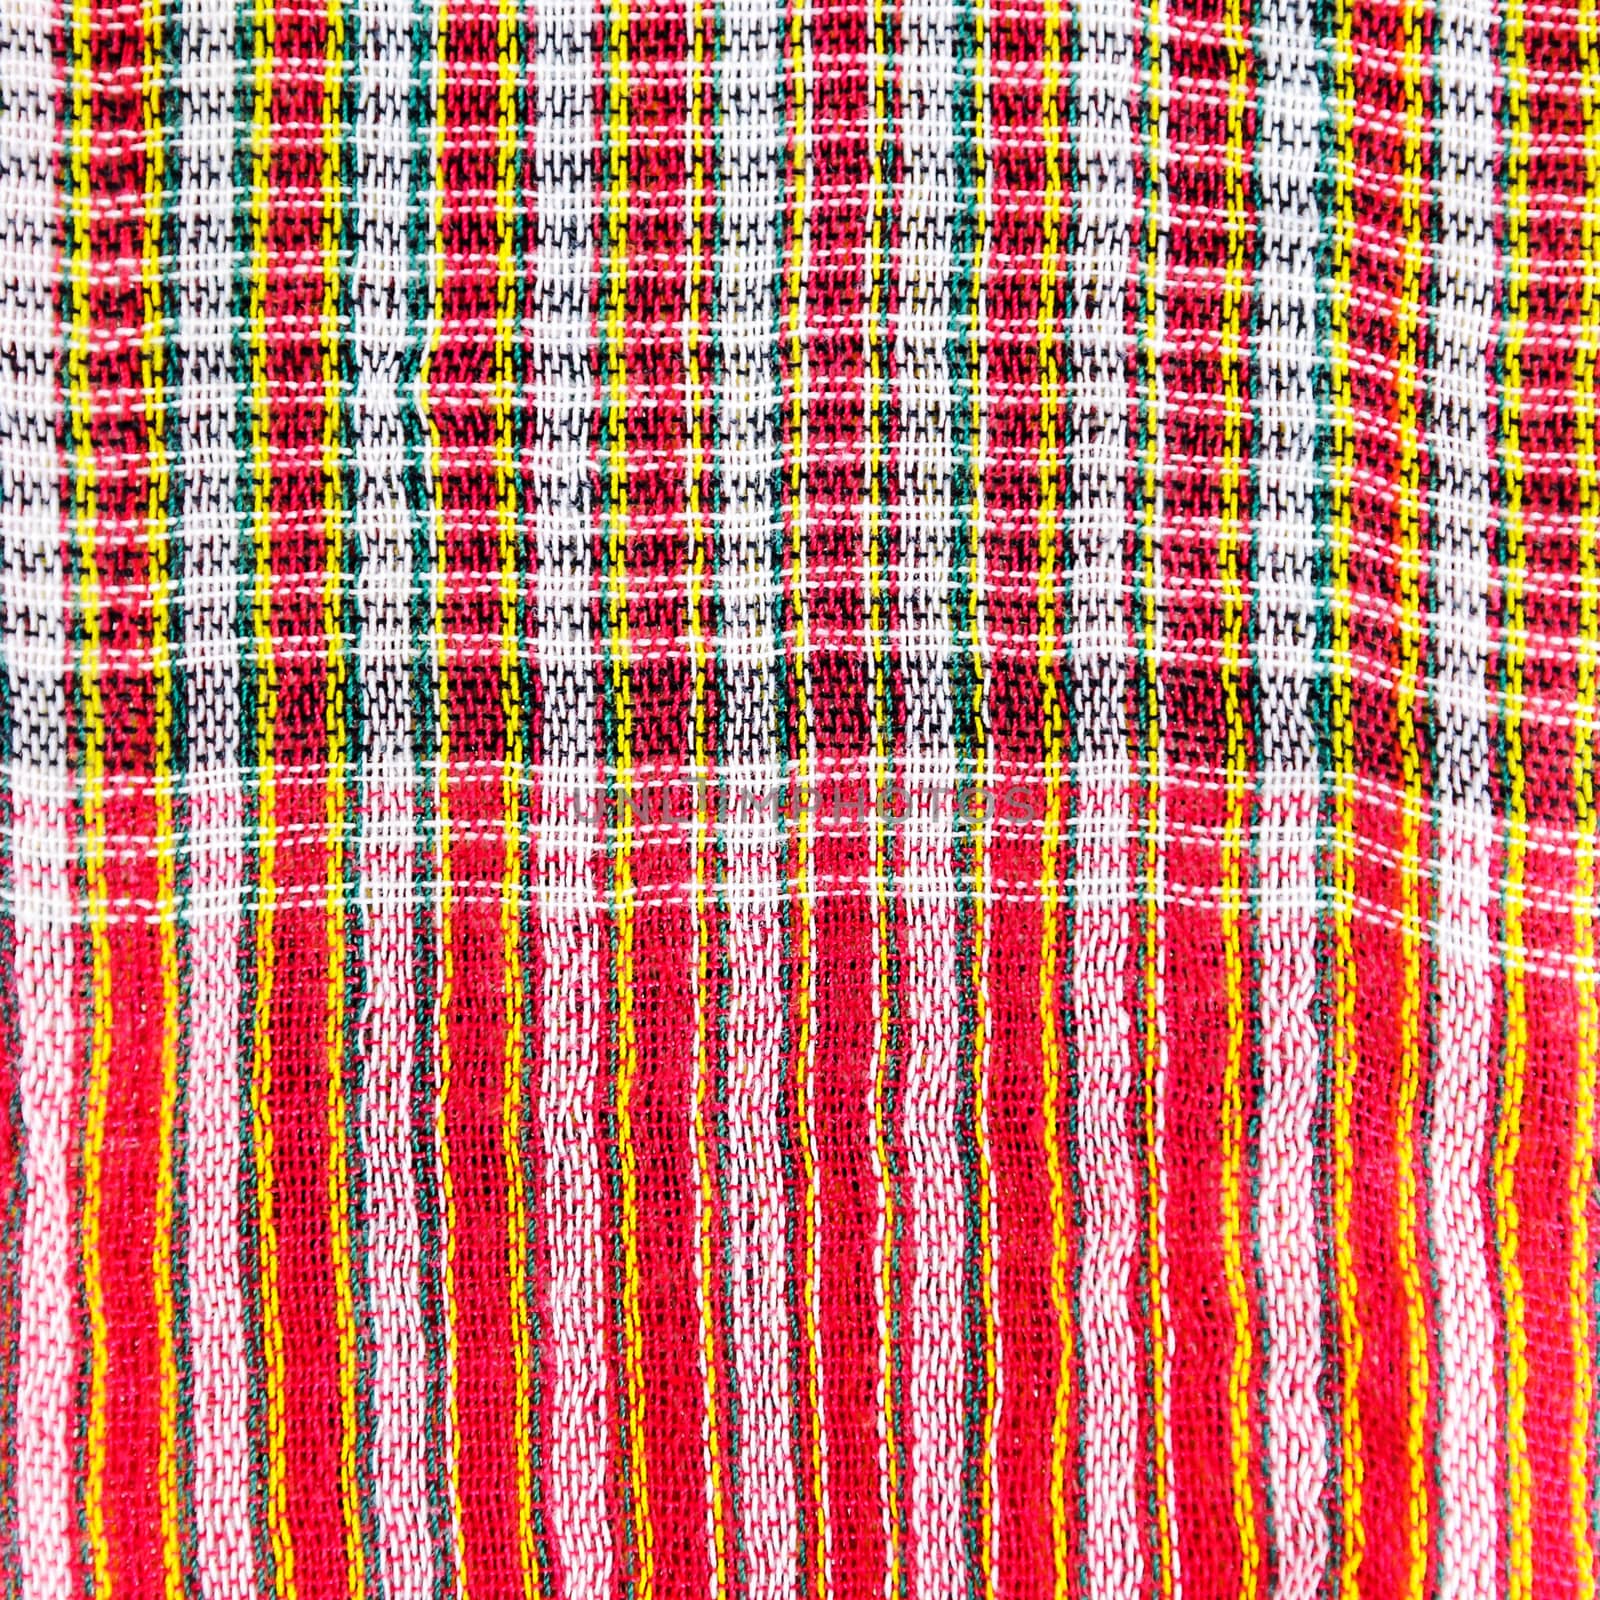 Hand woven fabric by NuwatPhoto